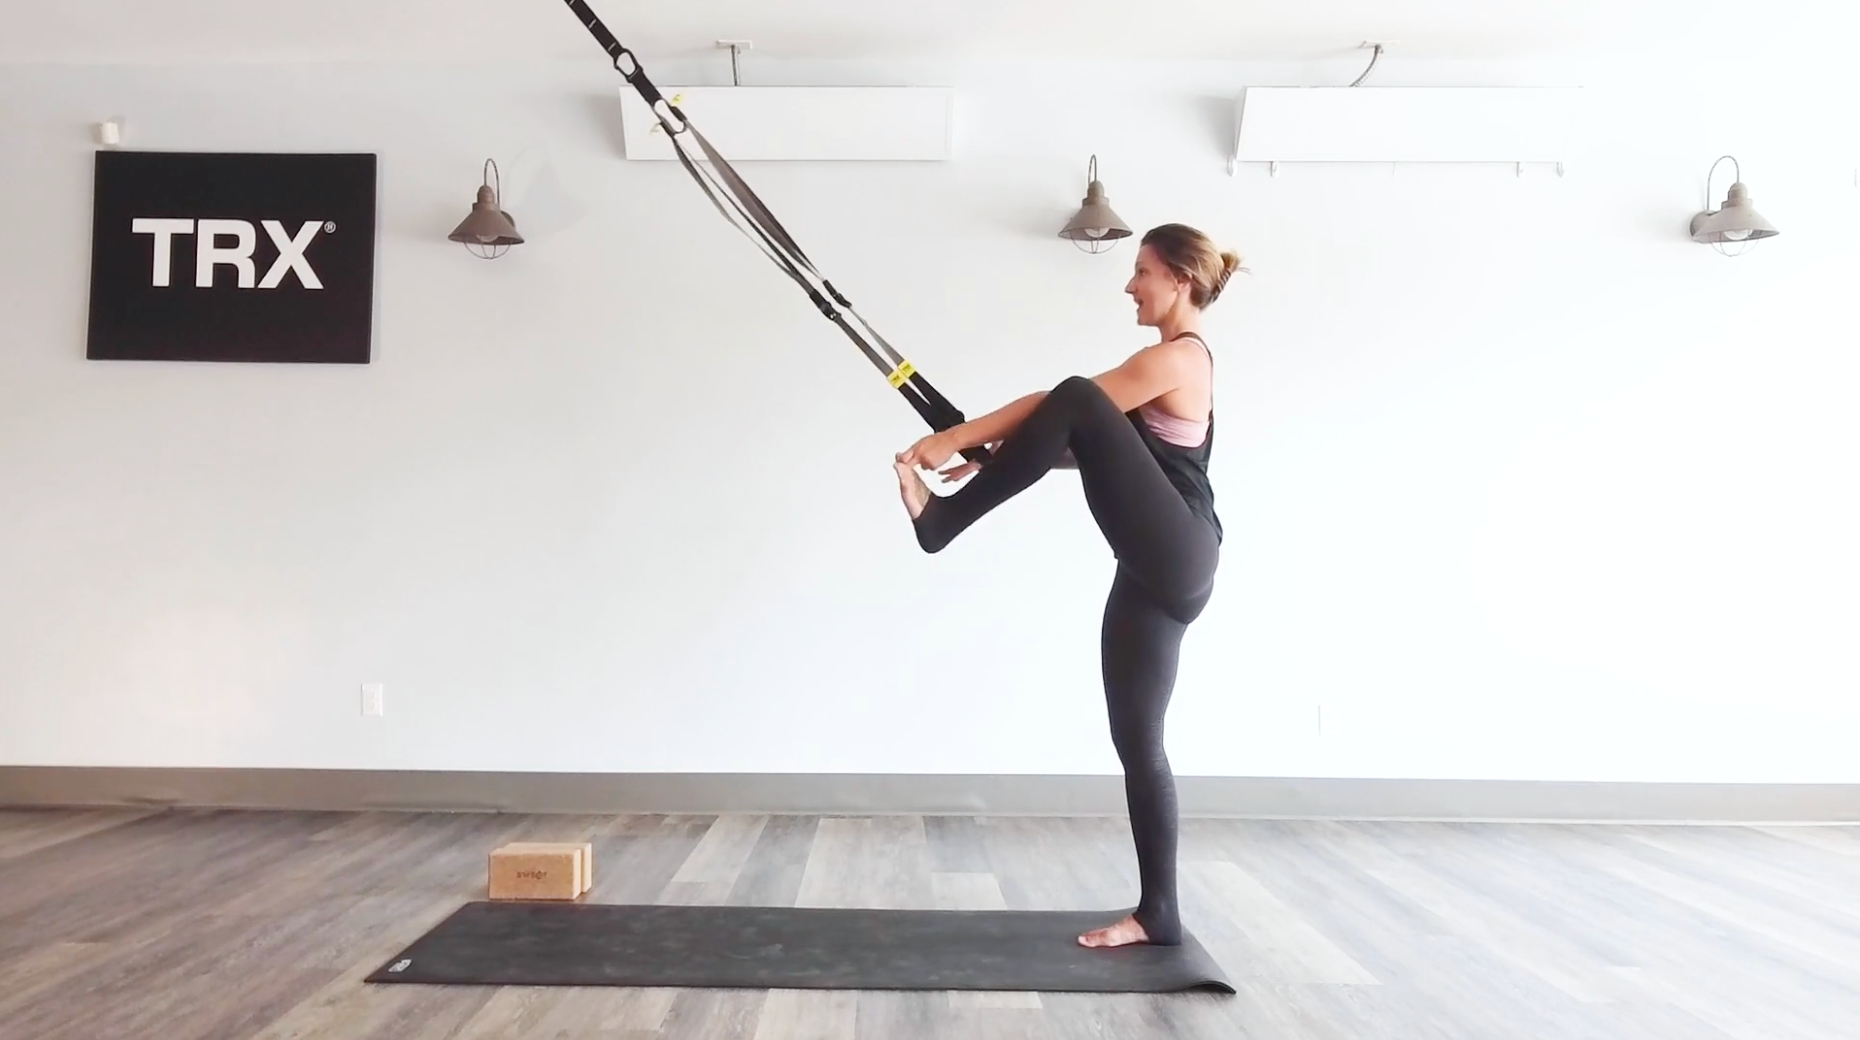 TRX MOVES OF THE WEEK: TRX For Balance